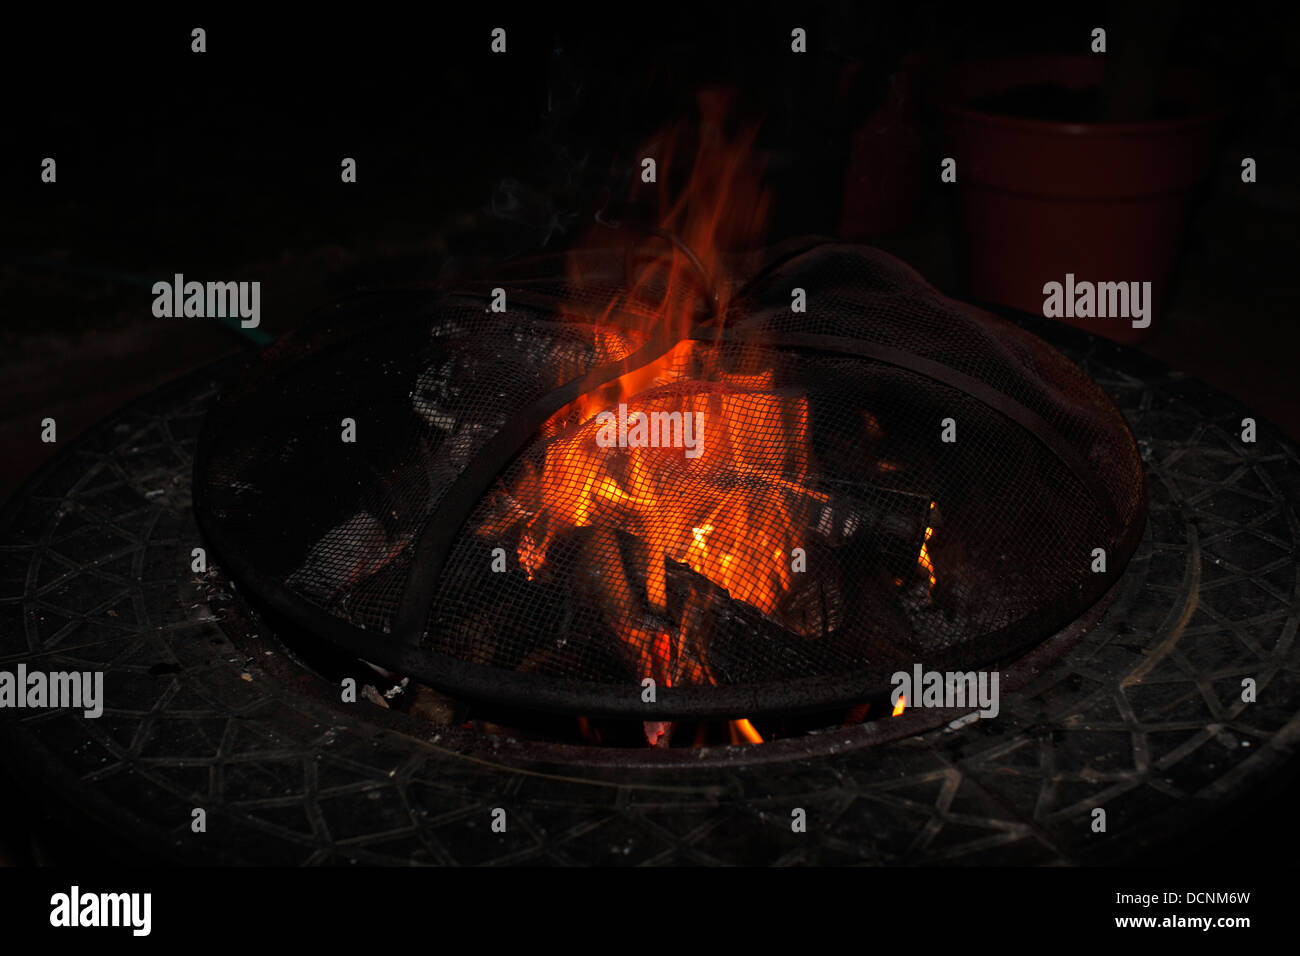 https://c8.alamy.com/comp/DCNM6W/outdoor-fire-pit-at-night-DCNM6W.jpg